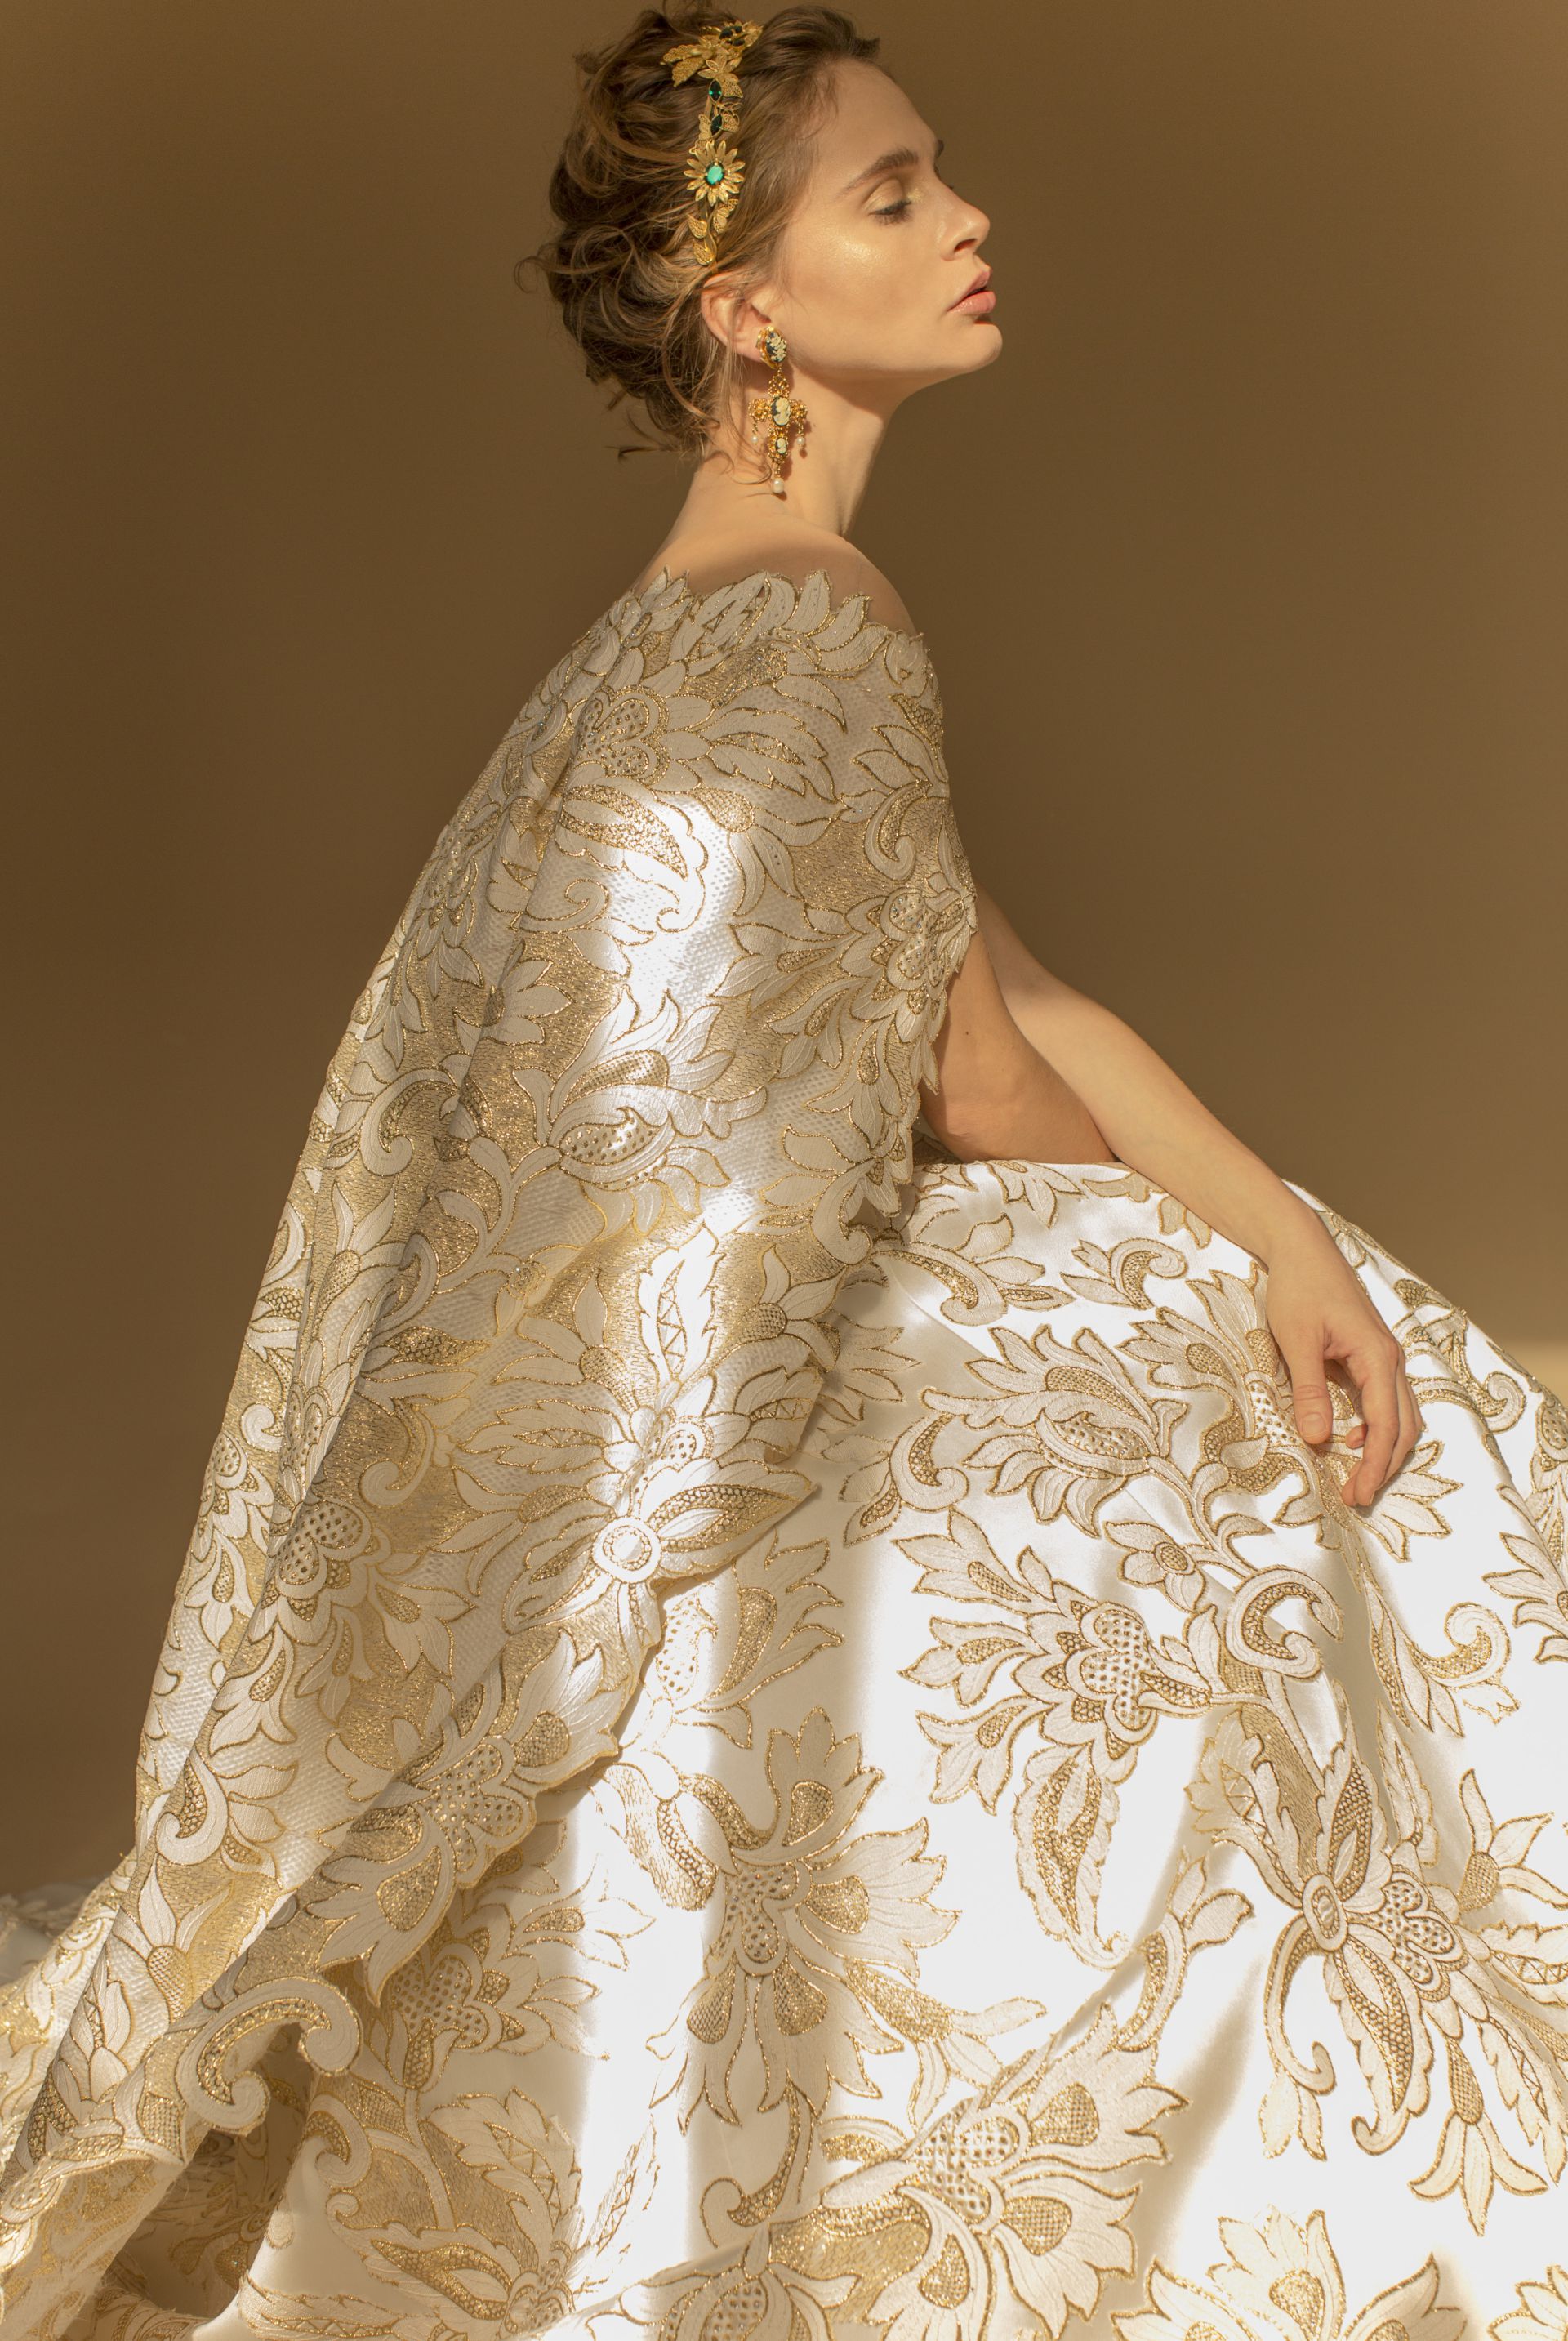 Even the best-dressed czarina would have a hard time competing with this jacquard fantasy embellished with metallic gold threads and Swarovski pearls.